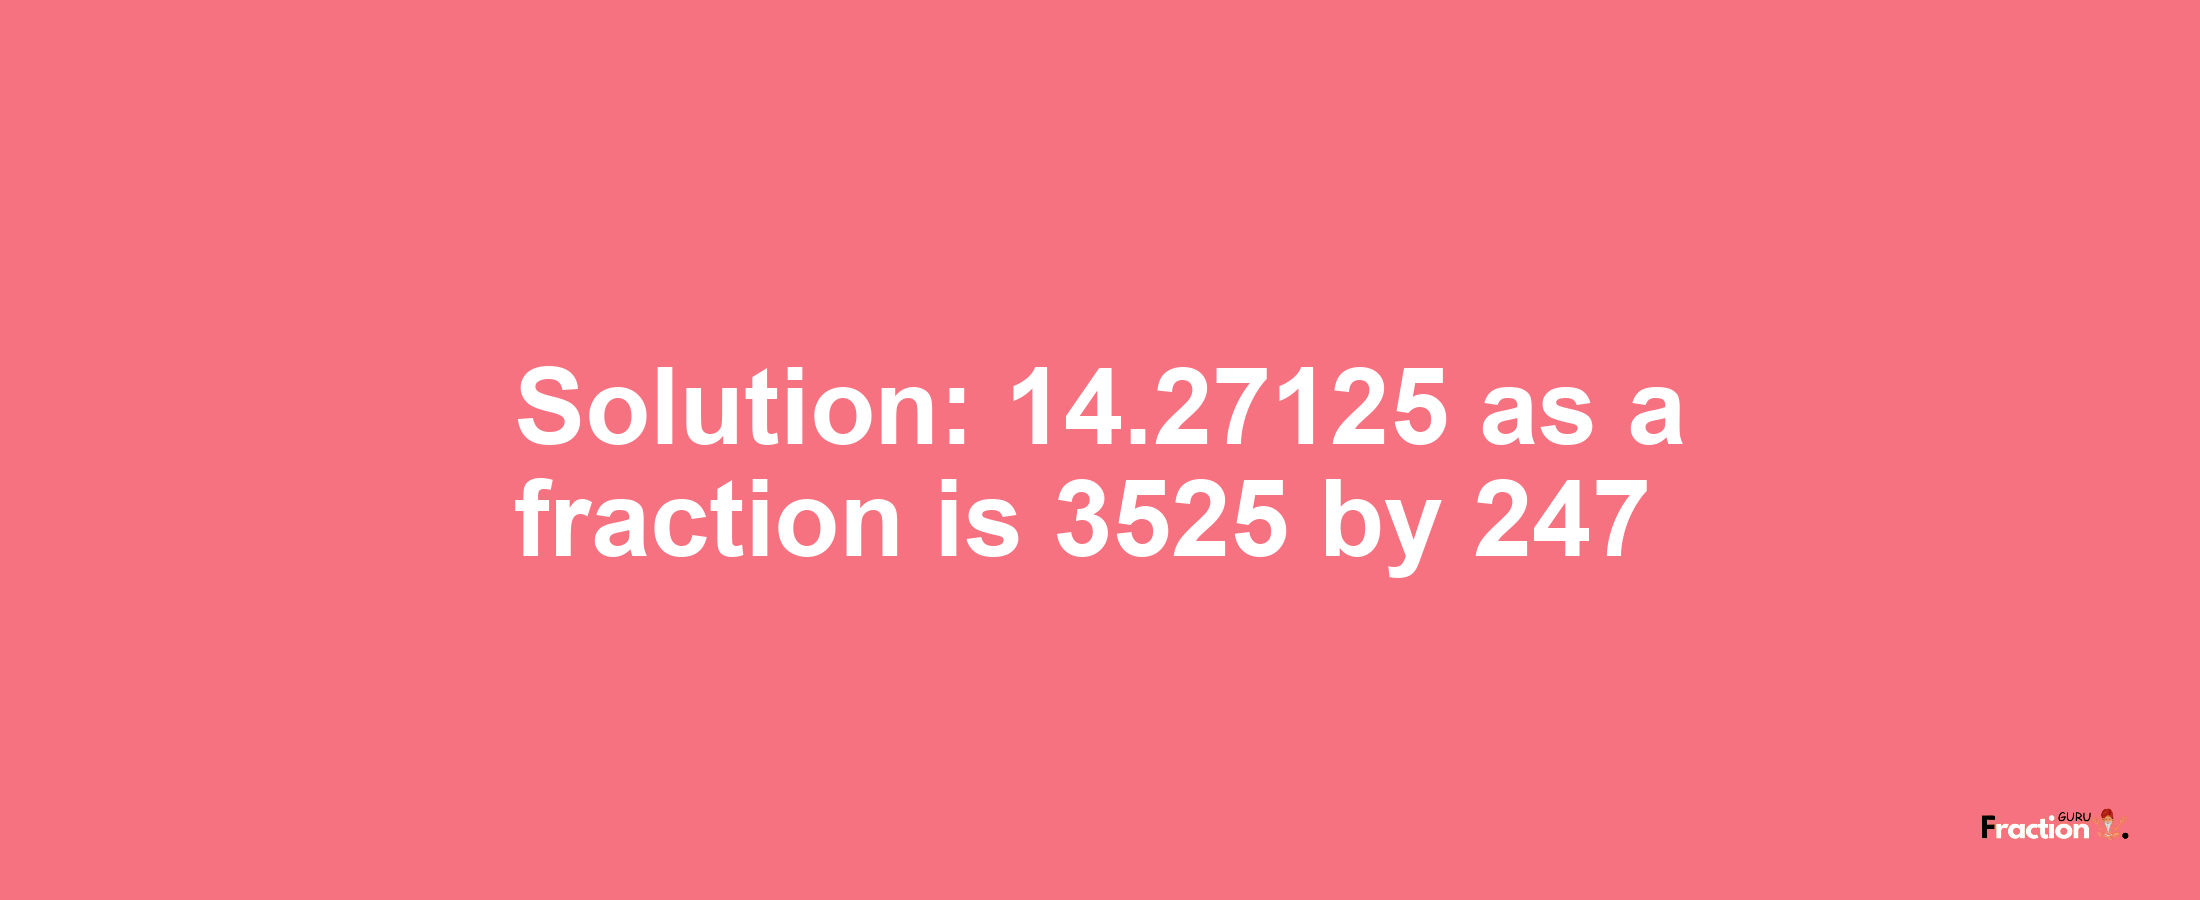 Solution:14.27125 as a fraction is 3525/247